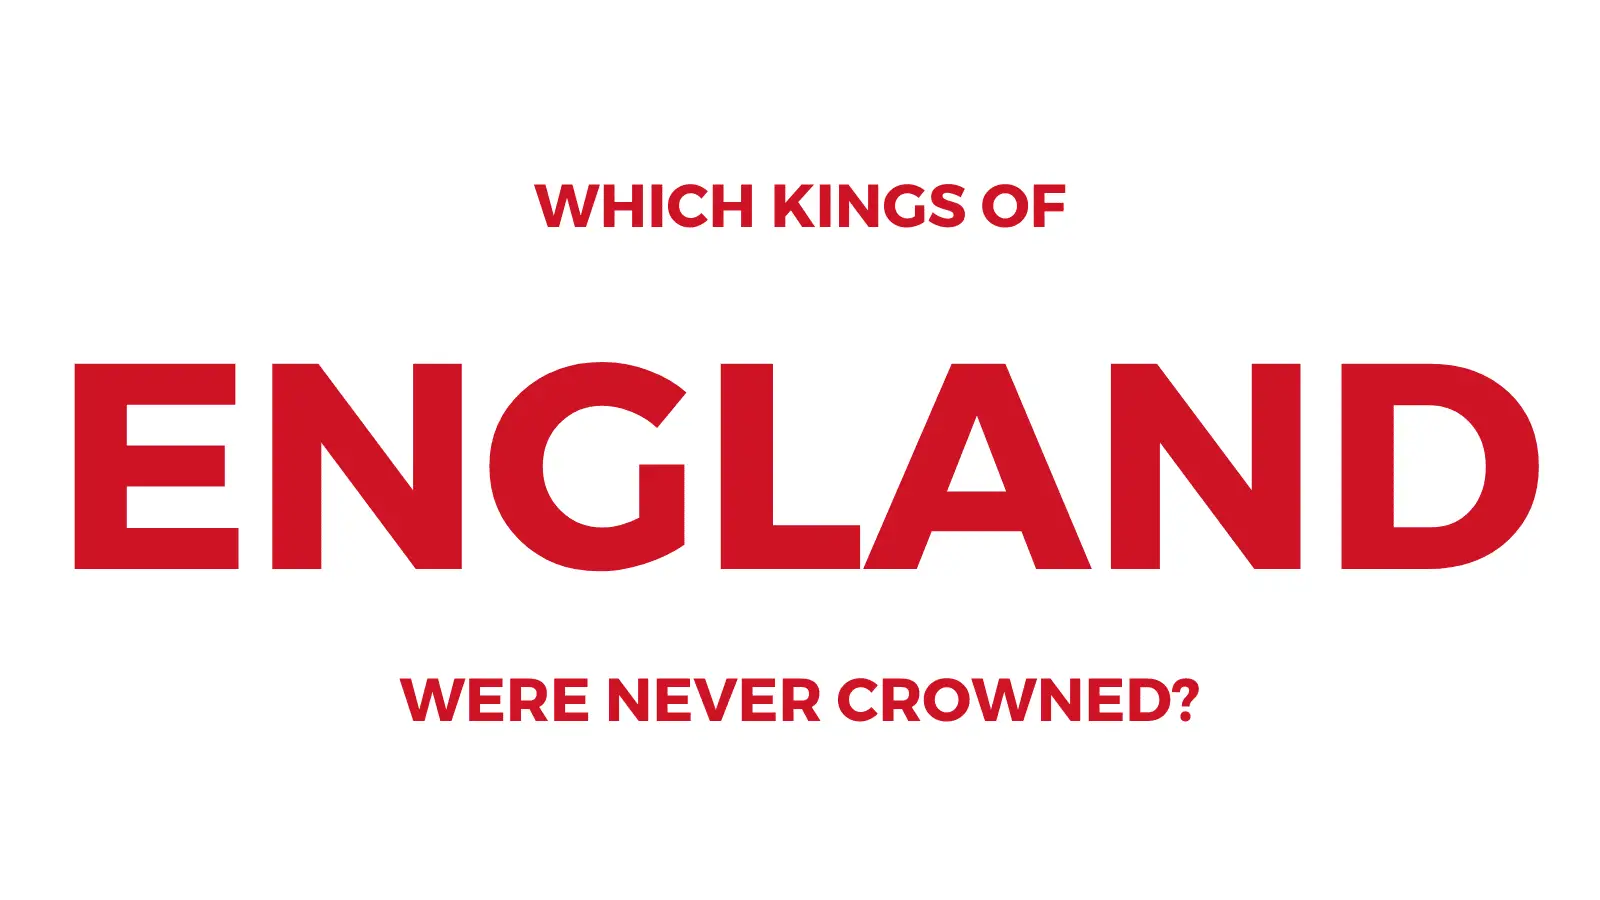 Which kings of England were never crowned